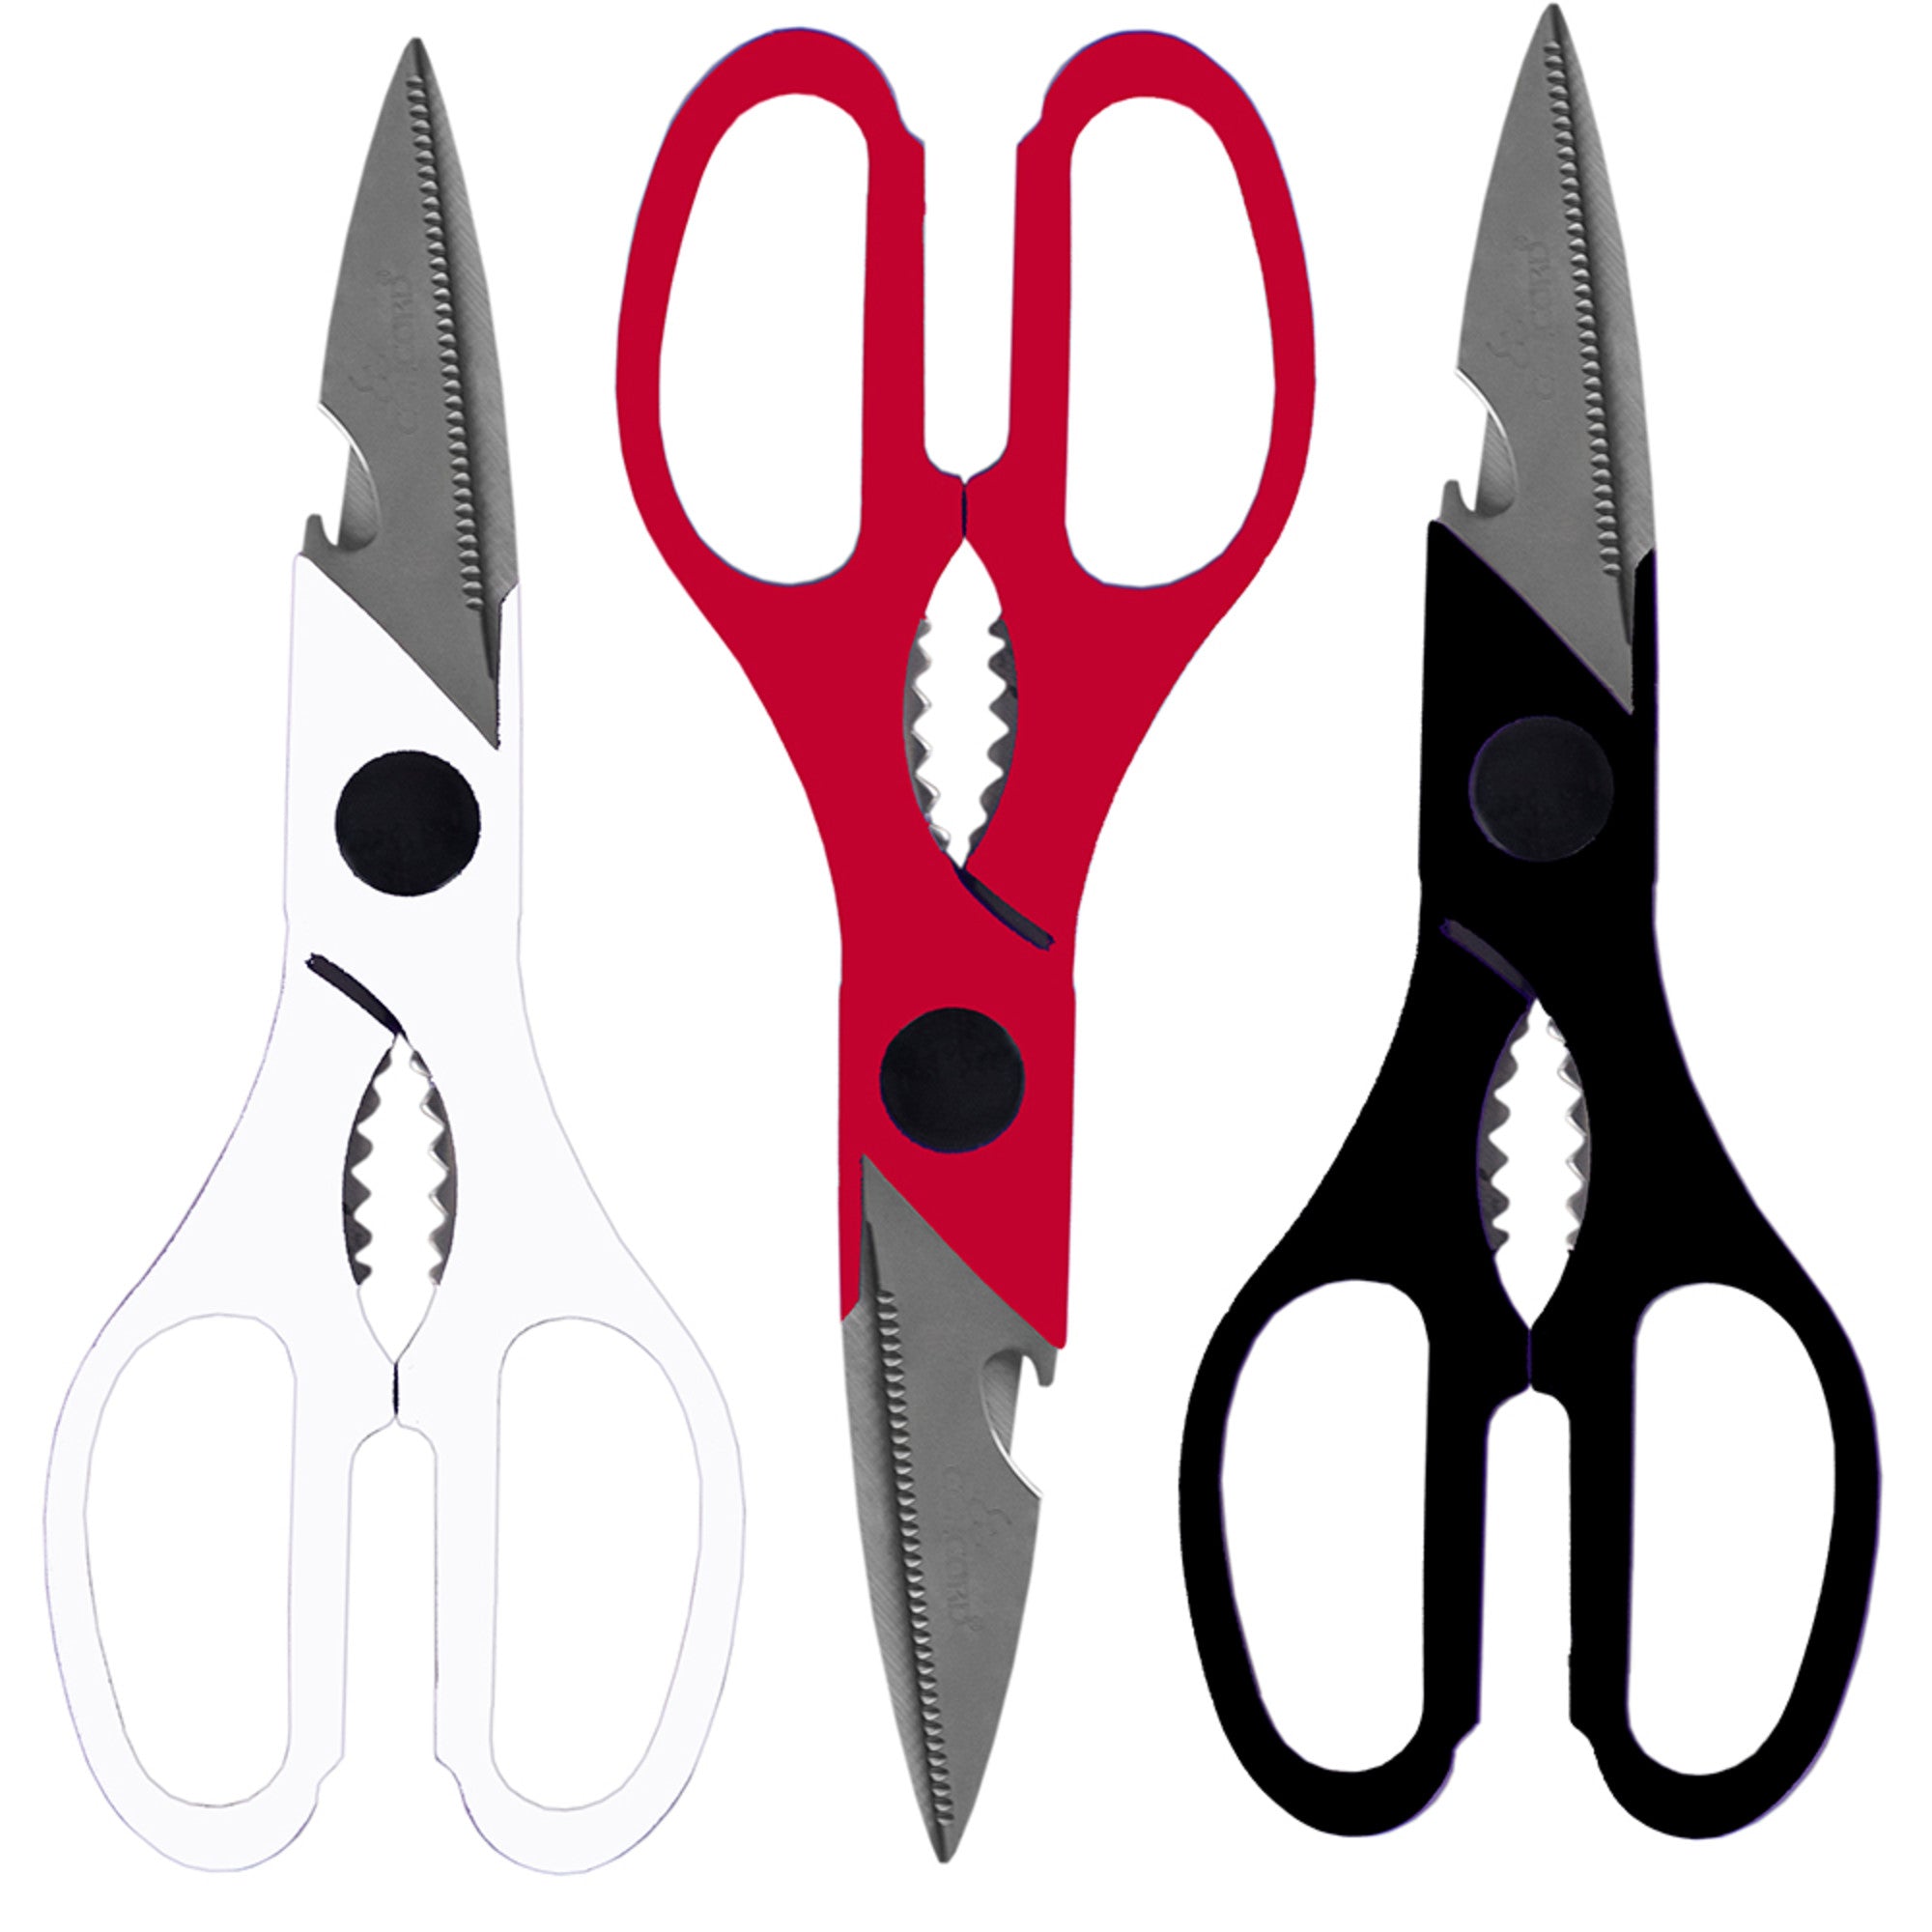 Stainless Kitchen / Household Shears